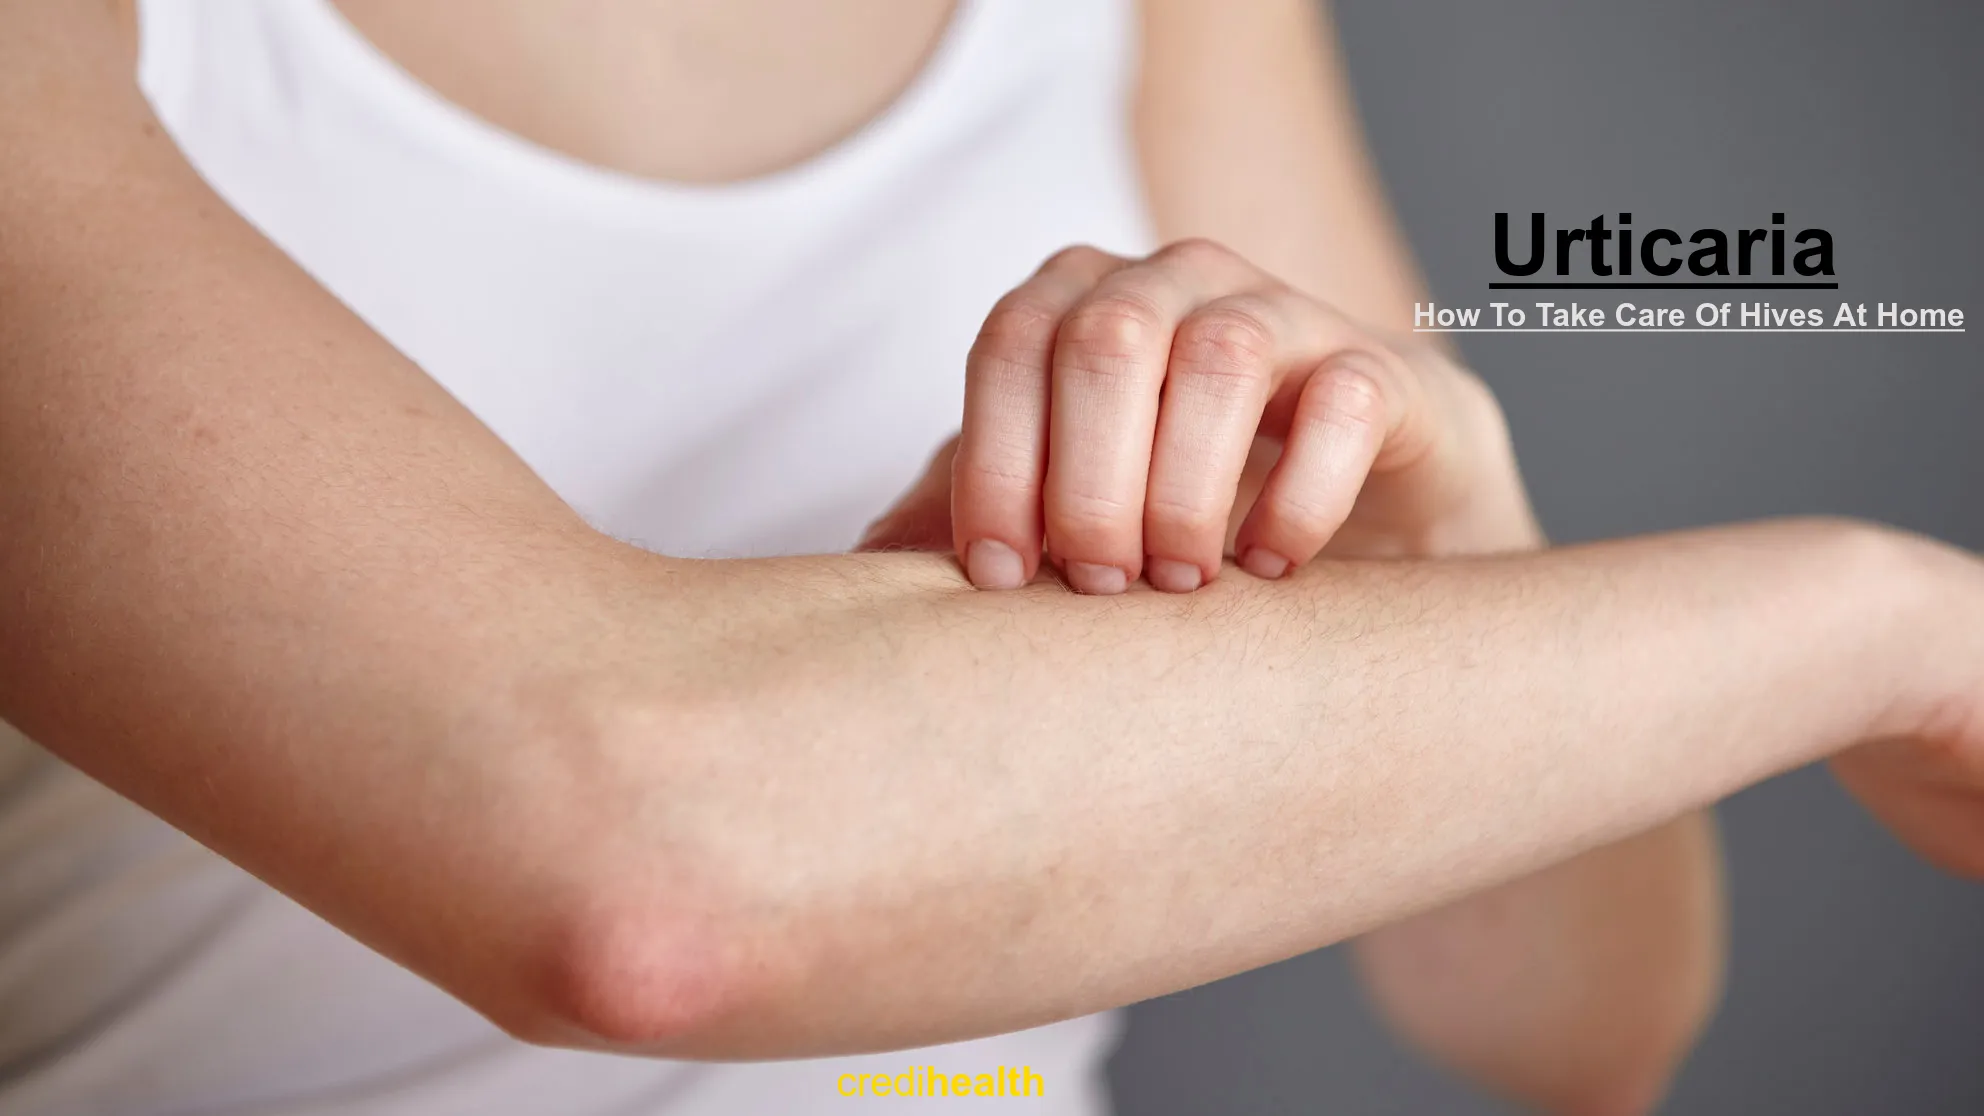 15 Urticaria Home Remedies: How To Take Care Of Hives At Home